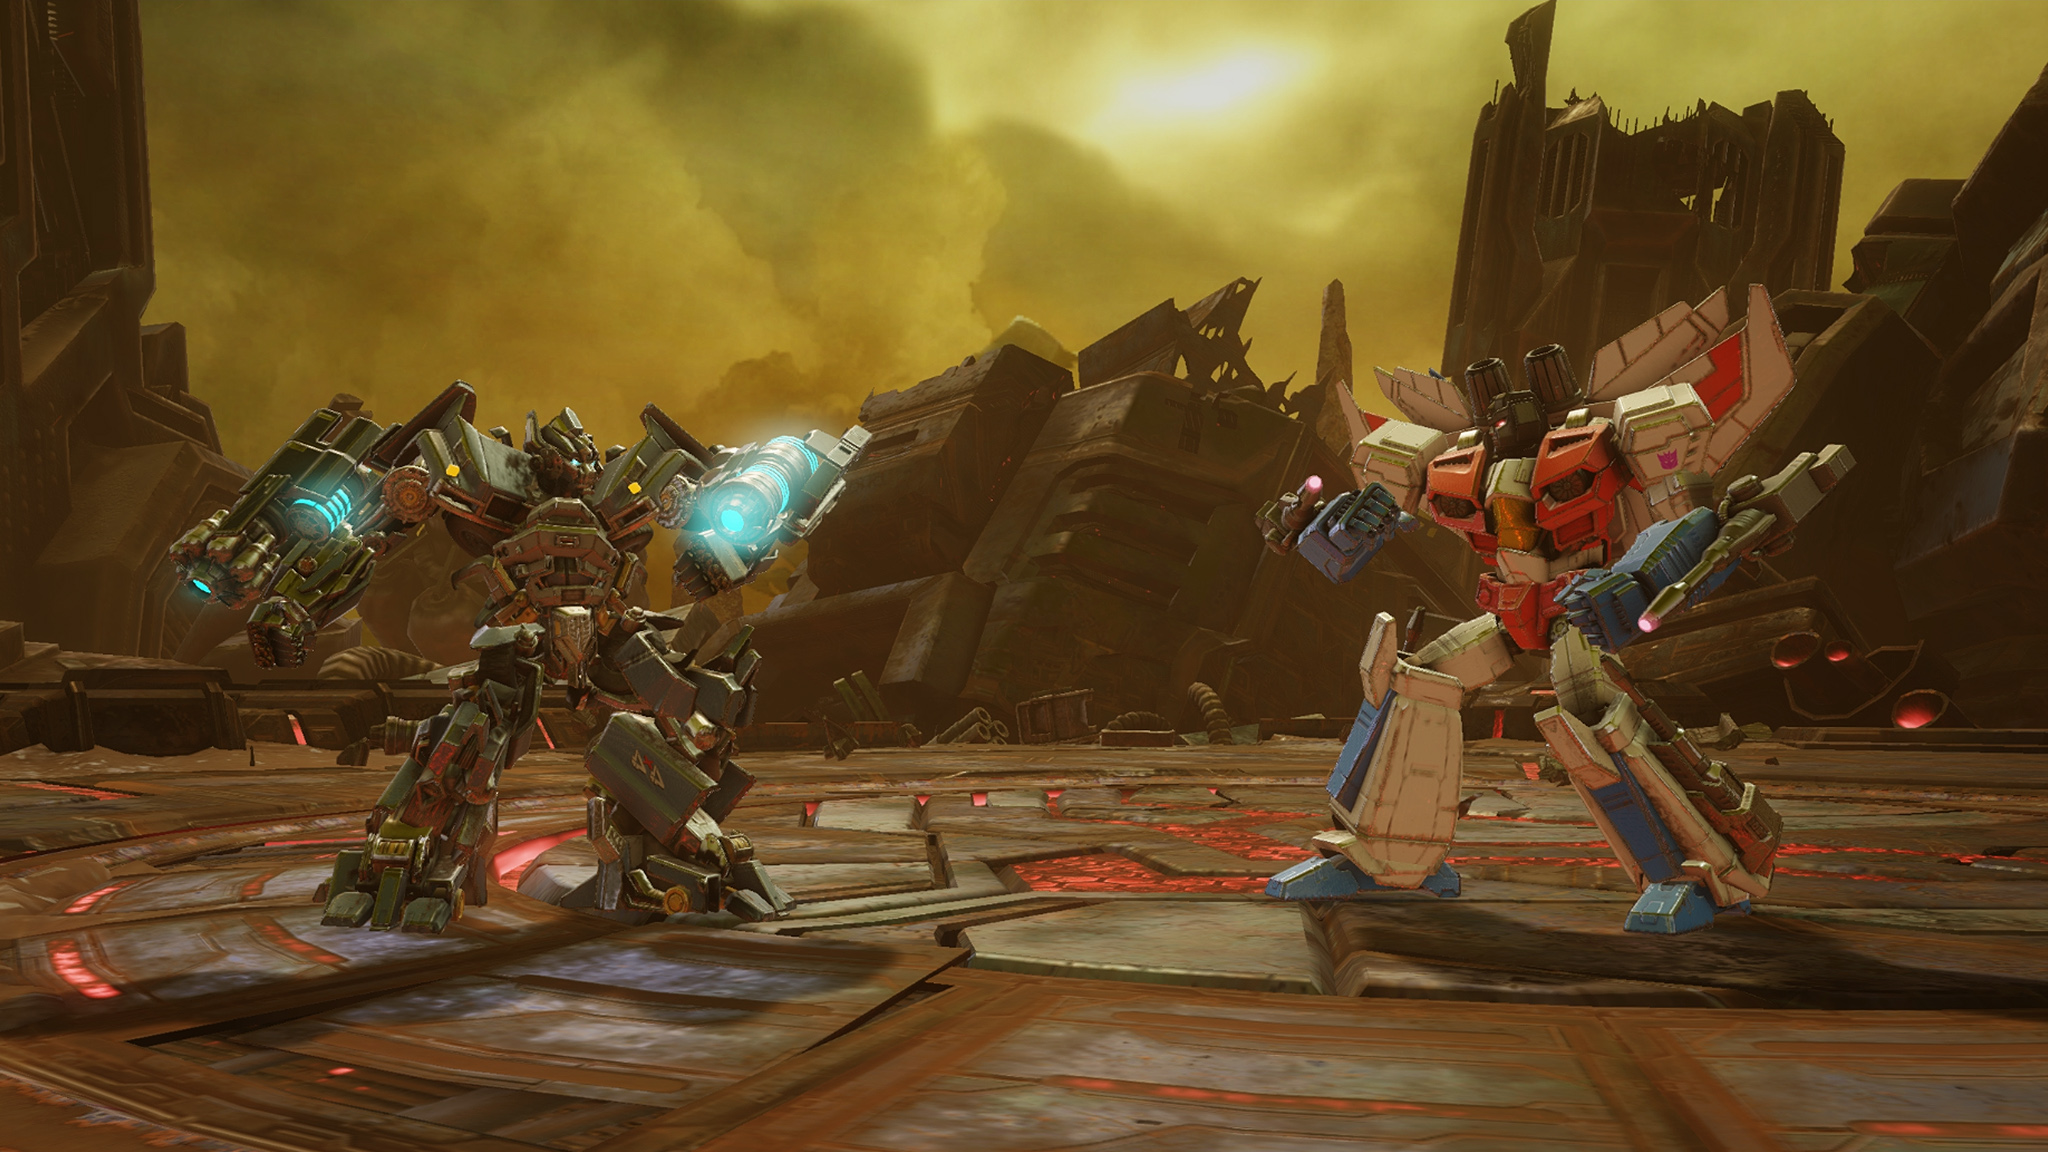 Transformers Is Getting A New Fighting Game, And I Don’t Care That It’s Mobile